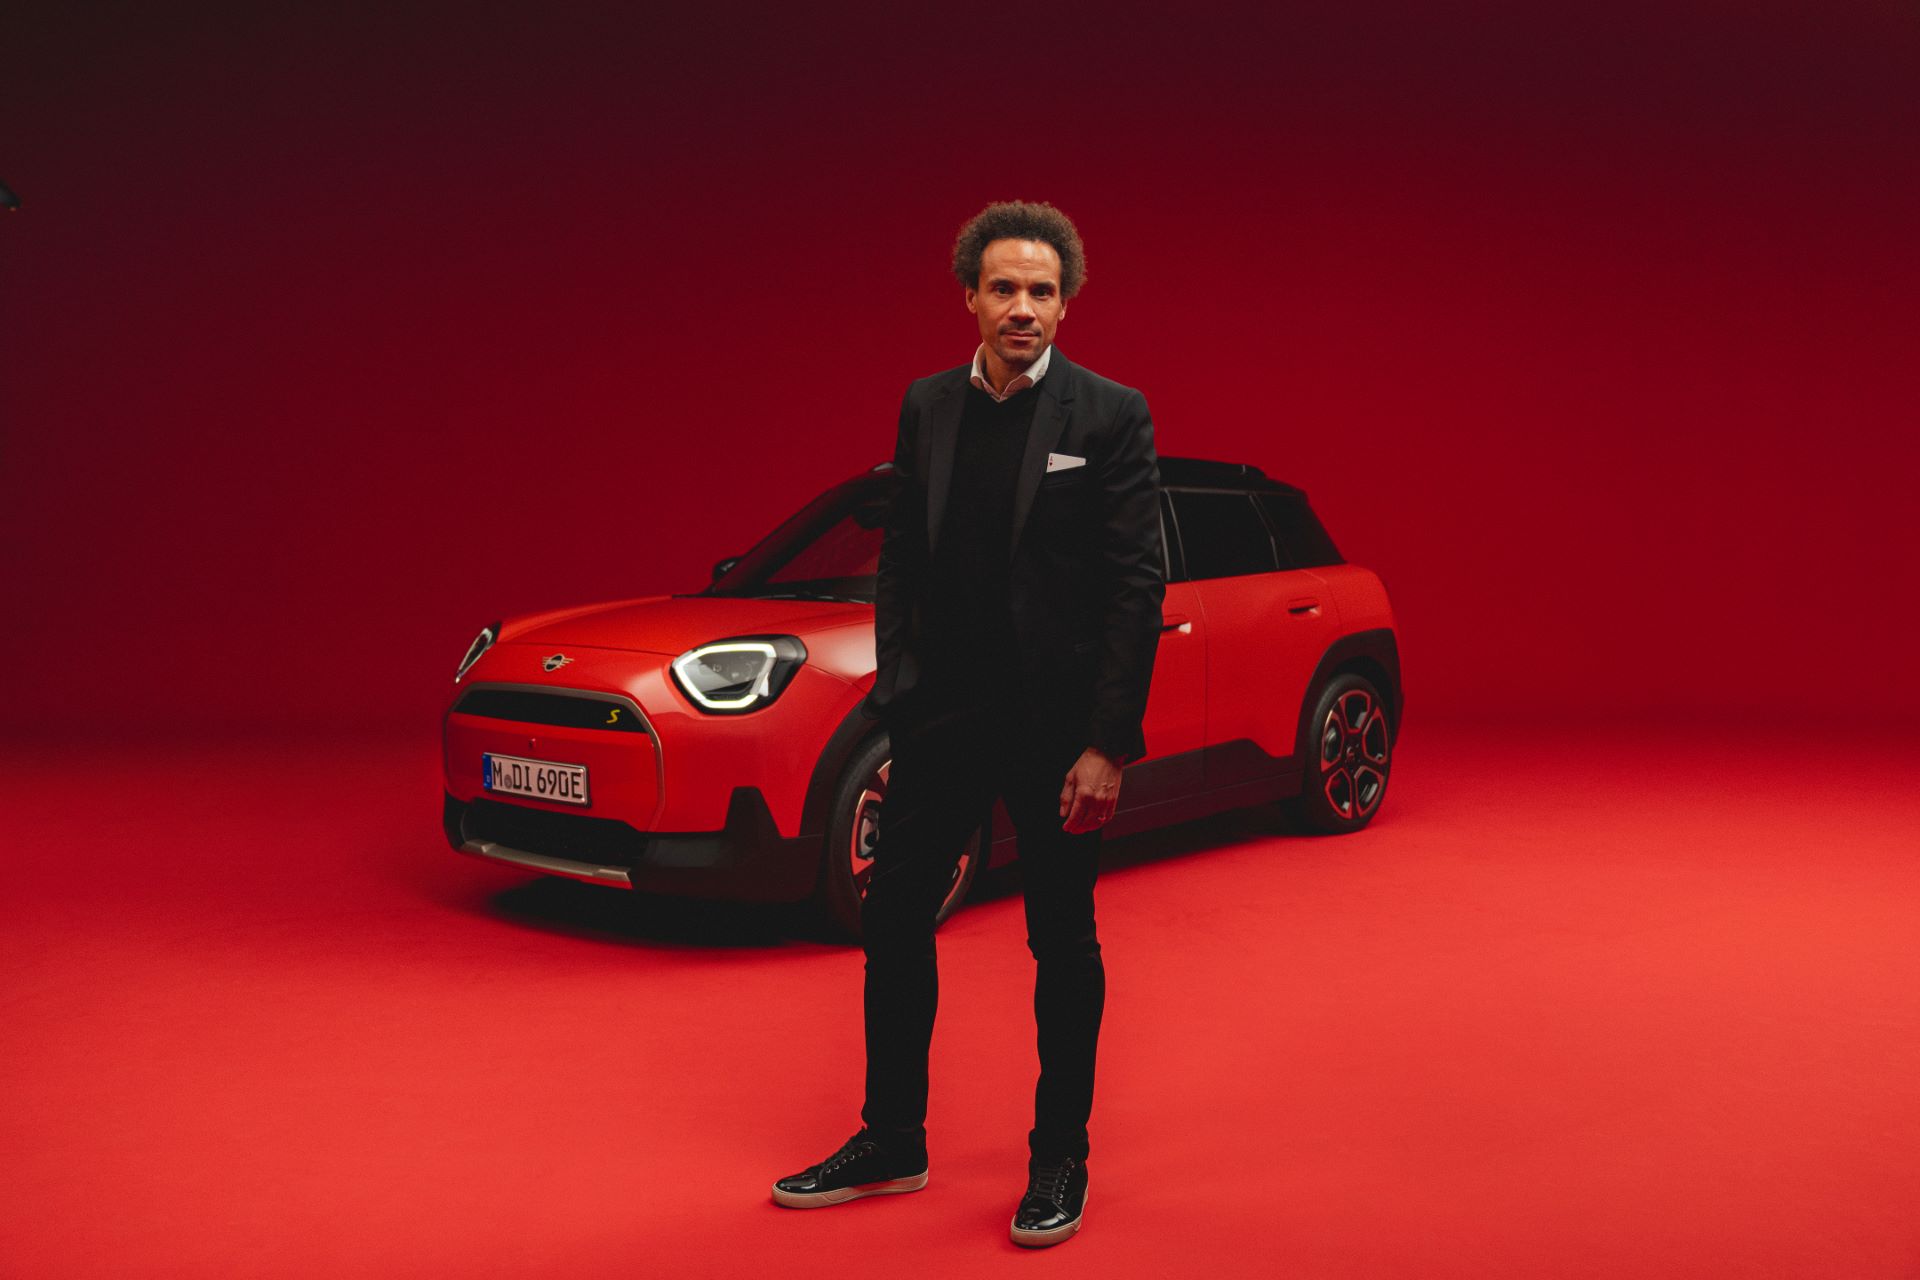 Shaping the Future: Reinventing Tradition at MINI